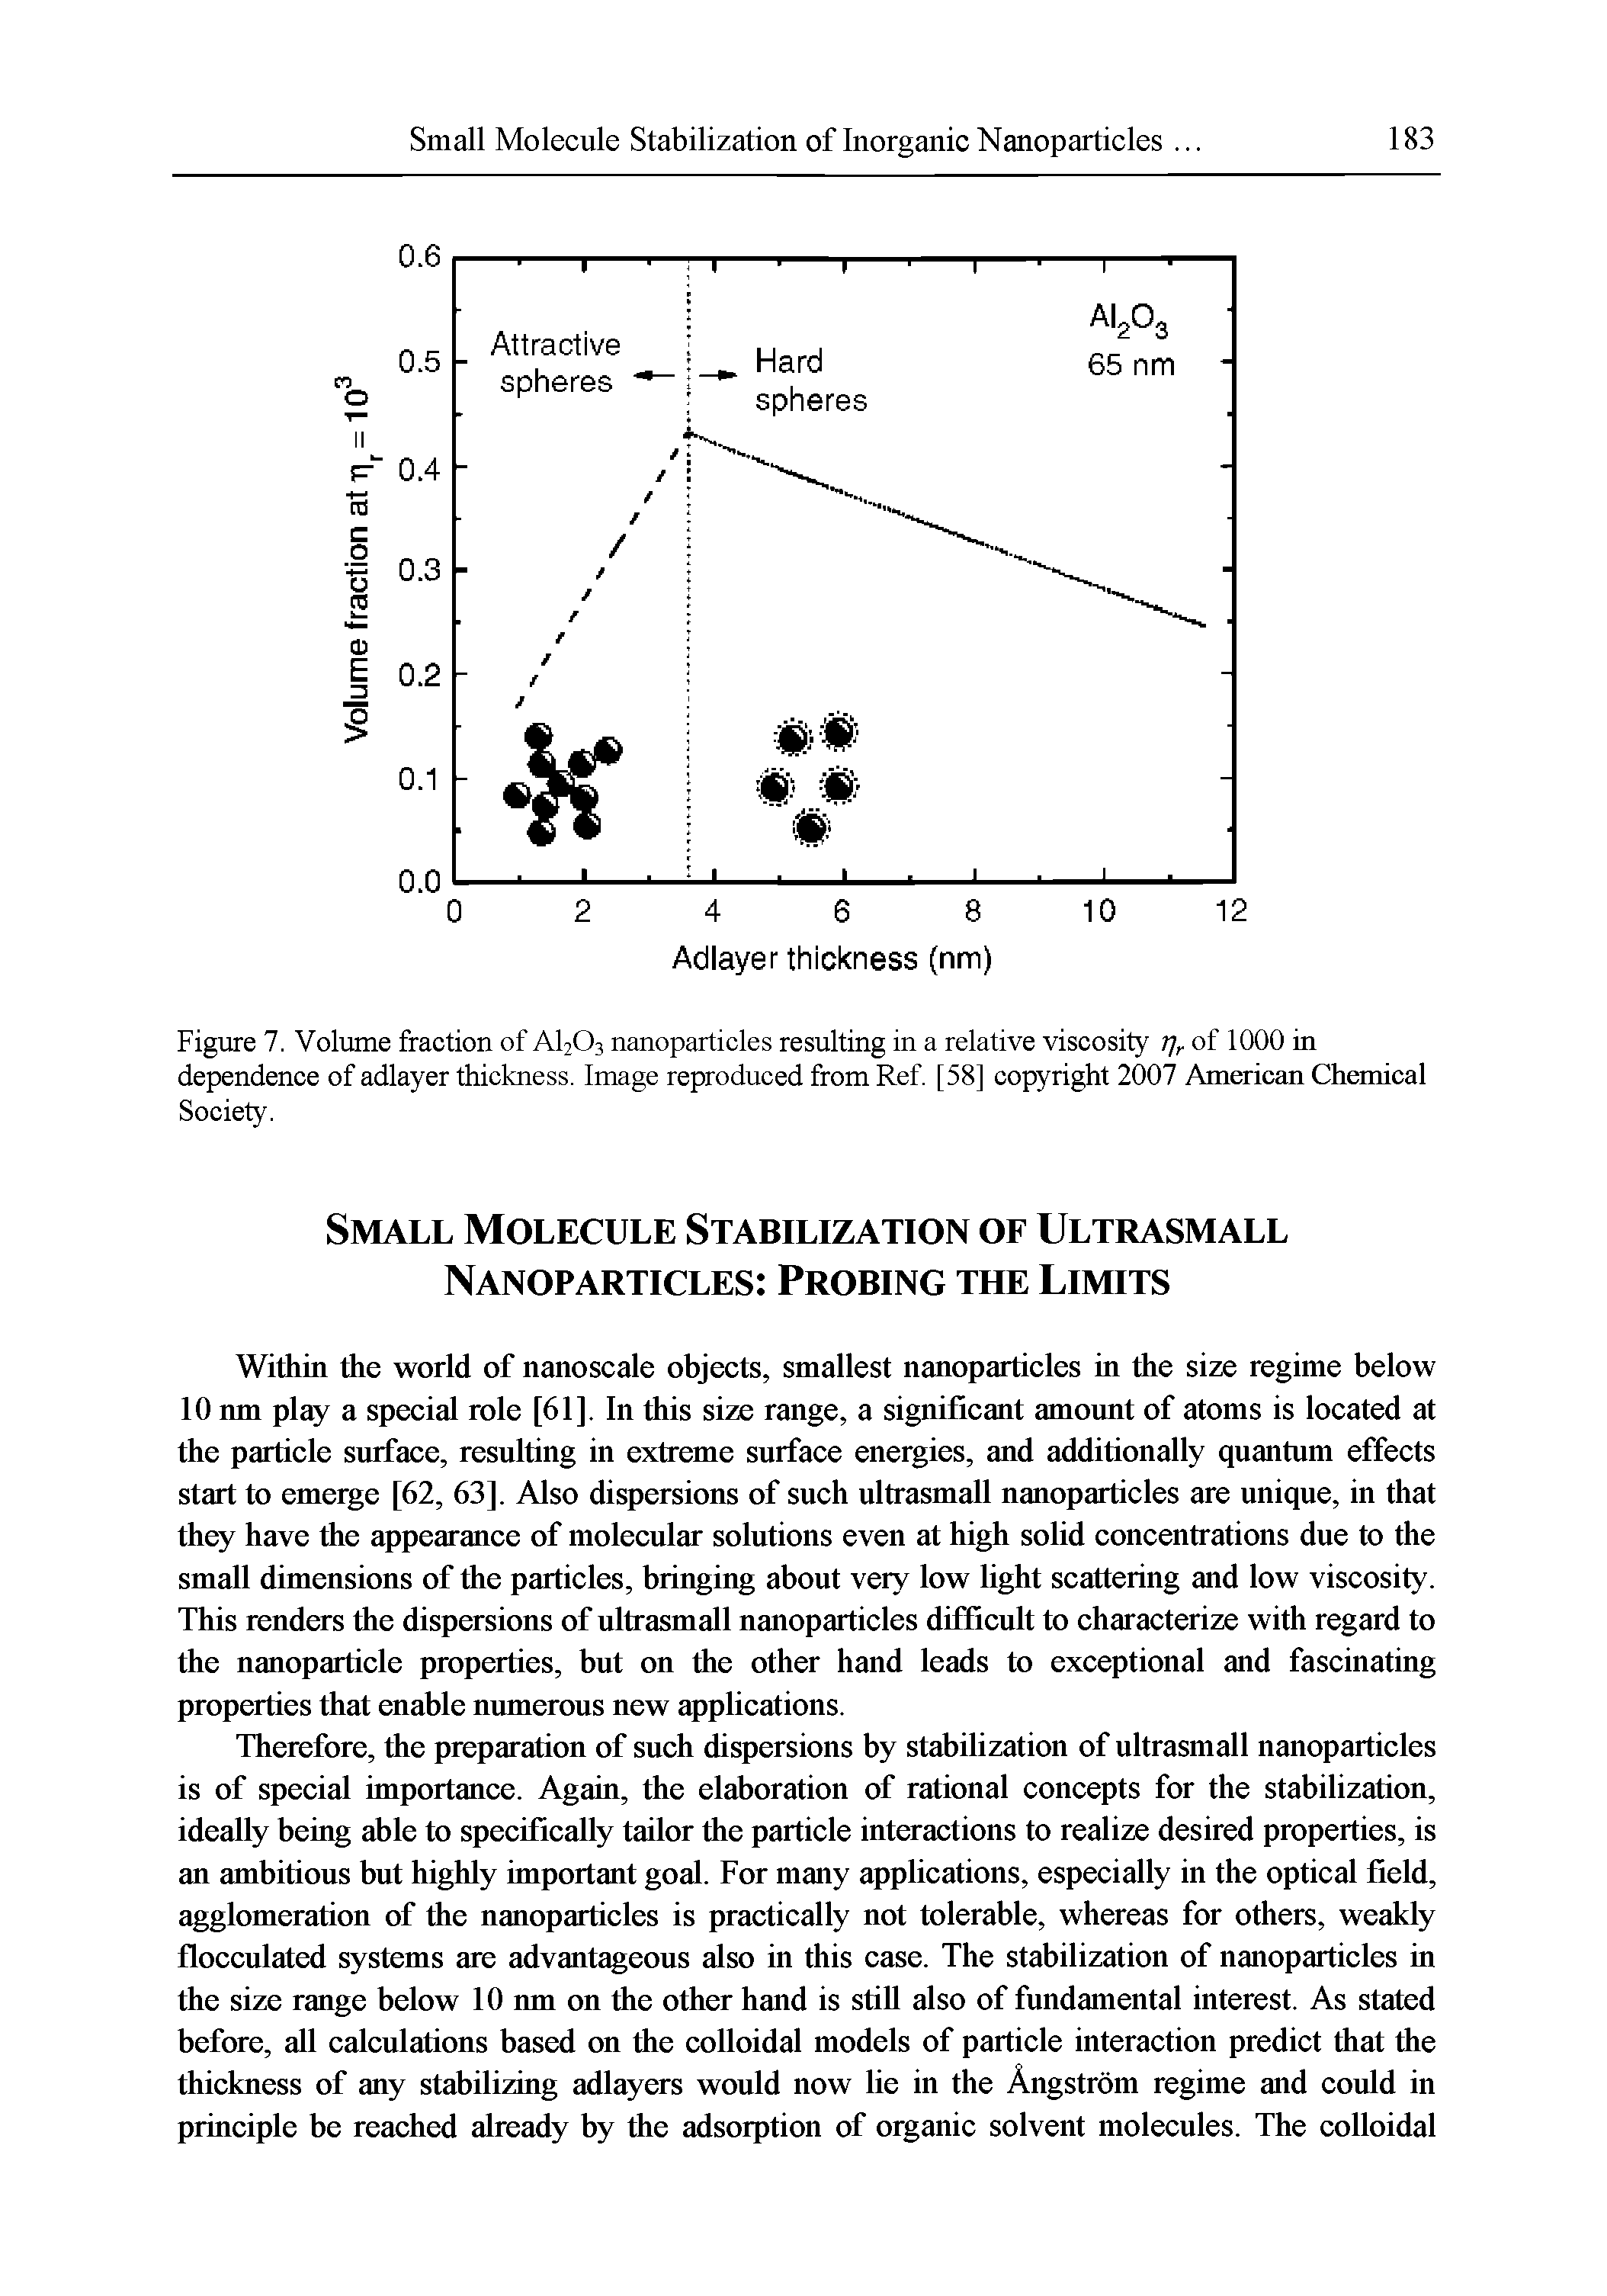 Figure 7. Volume fraction of AI2O3 nanoparticles resulting in a relative viscosity ijr of 1000 in dependence of adlayer thickness. Image reproduced from Ref. [58] copyright 2007 American Chemical Society.